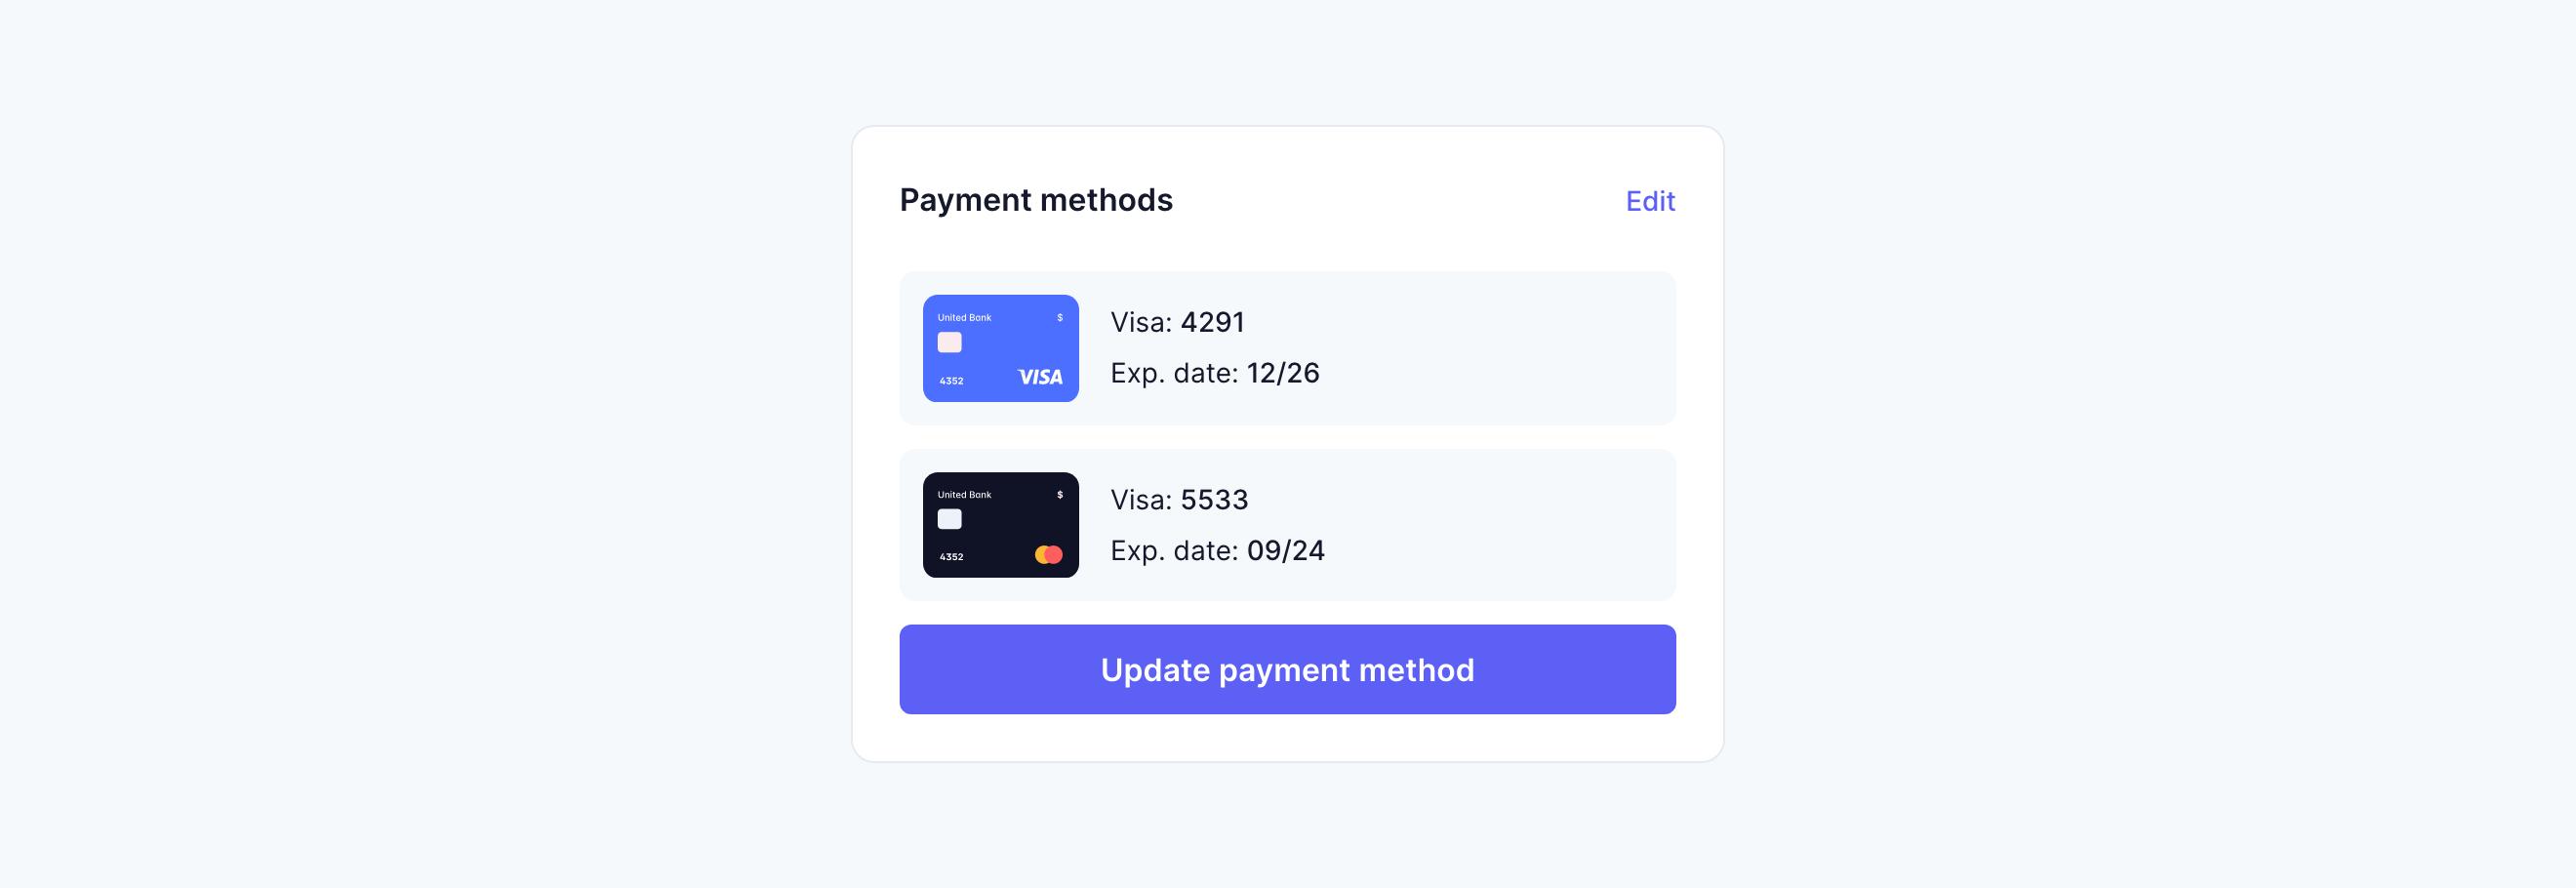 With contained payment methods and button